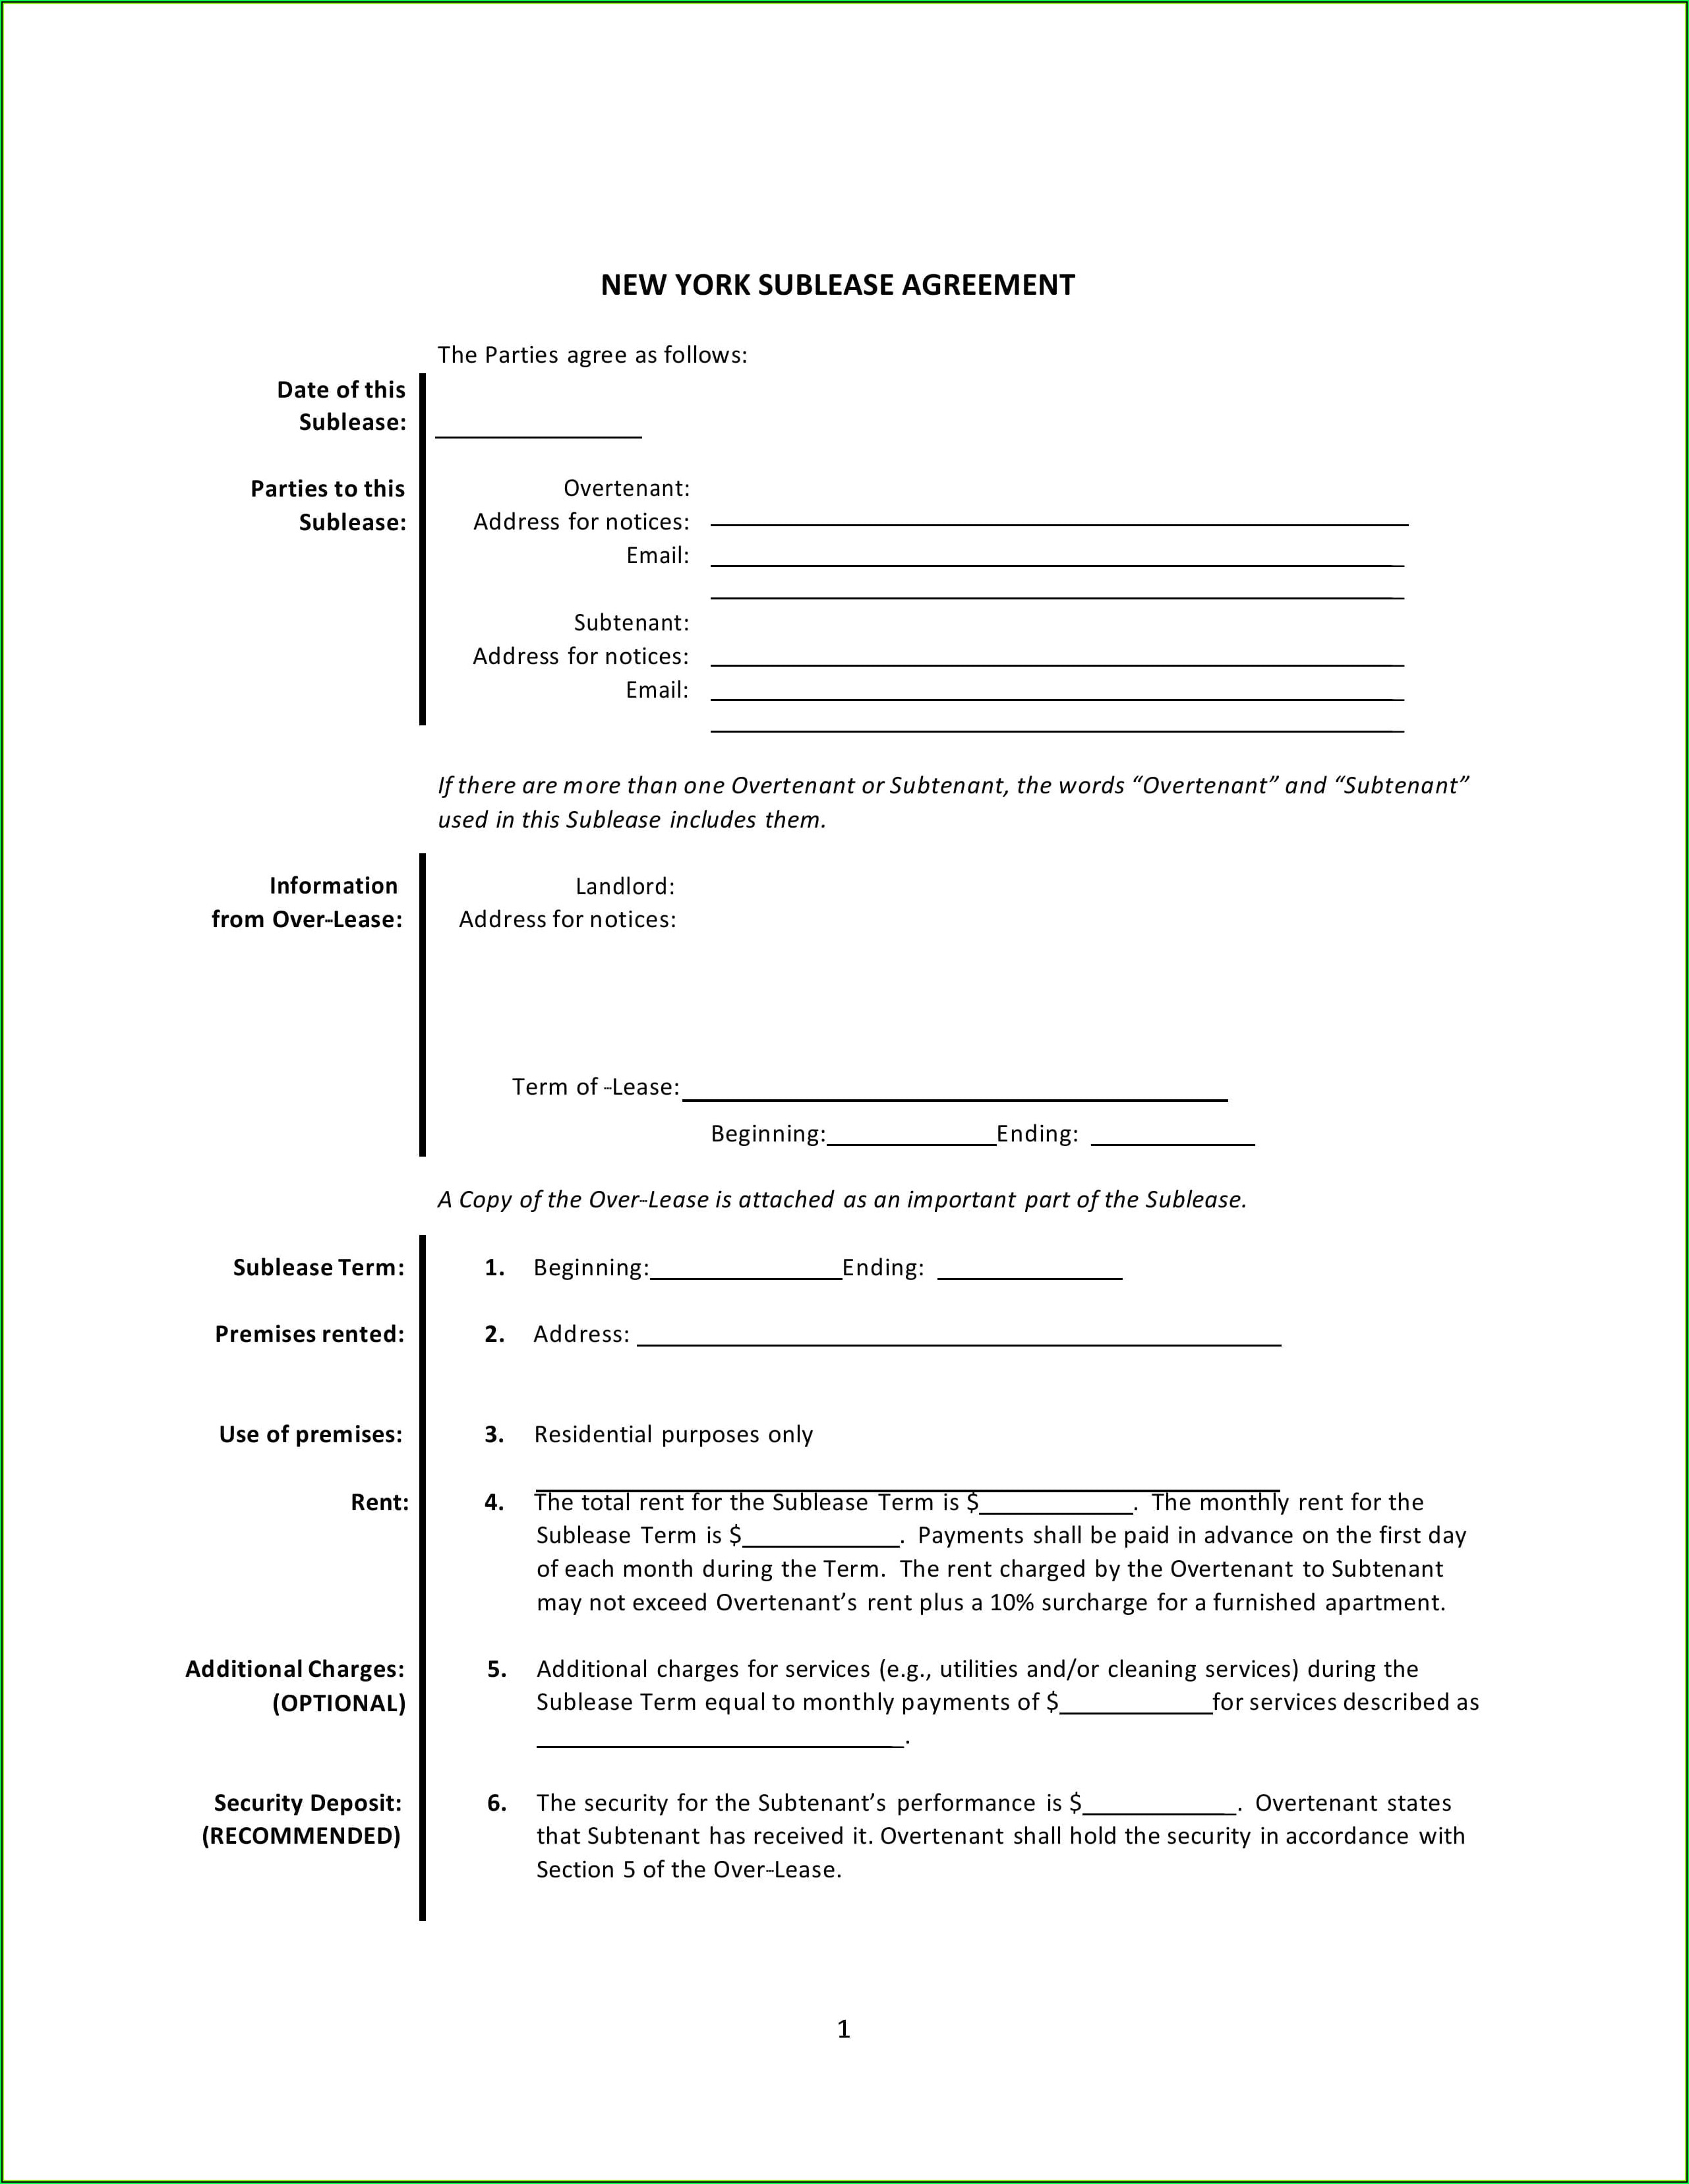 Sublet Lease Agreement Template New York